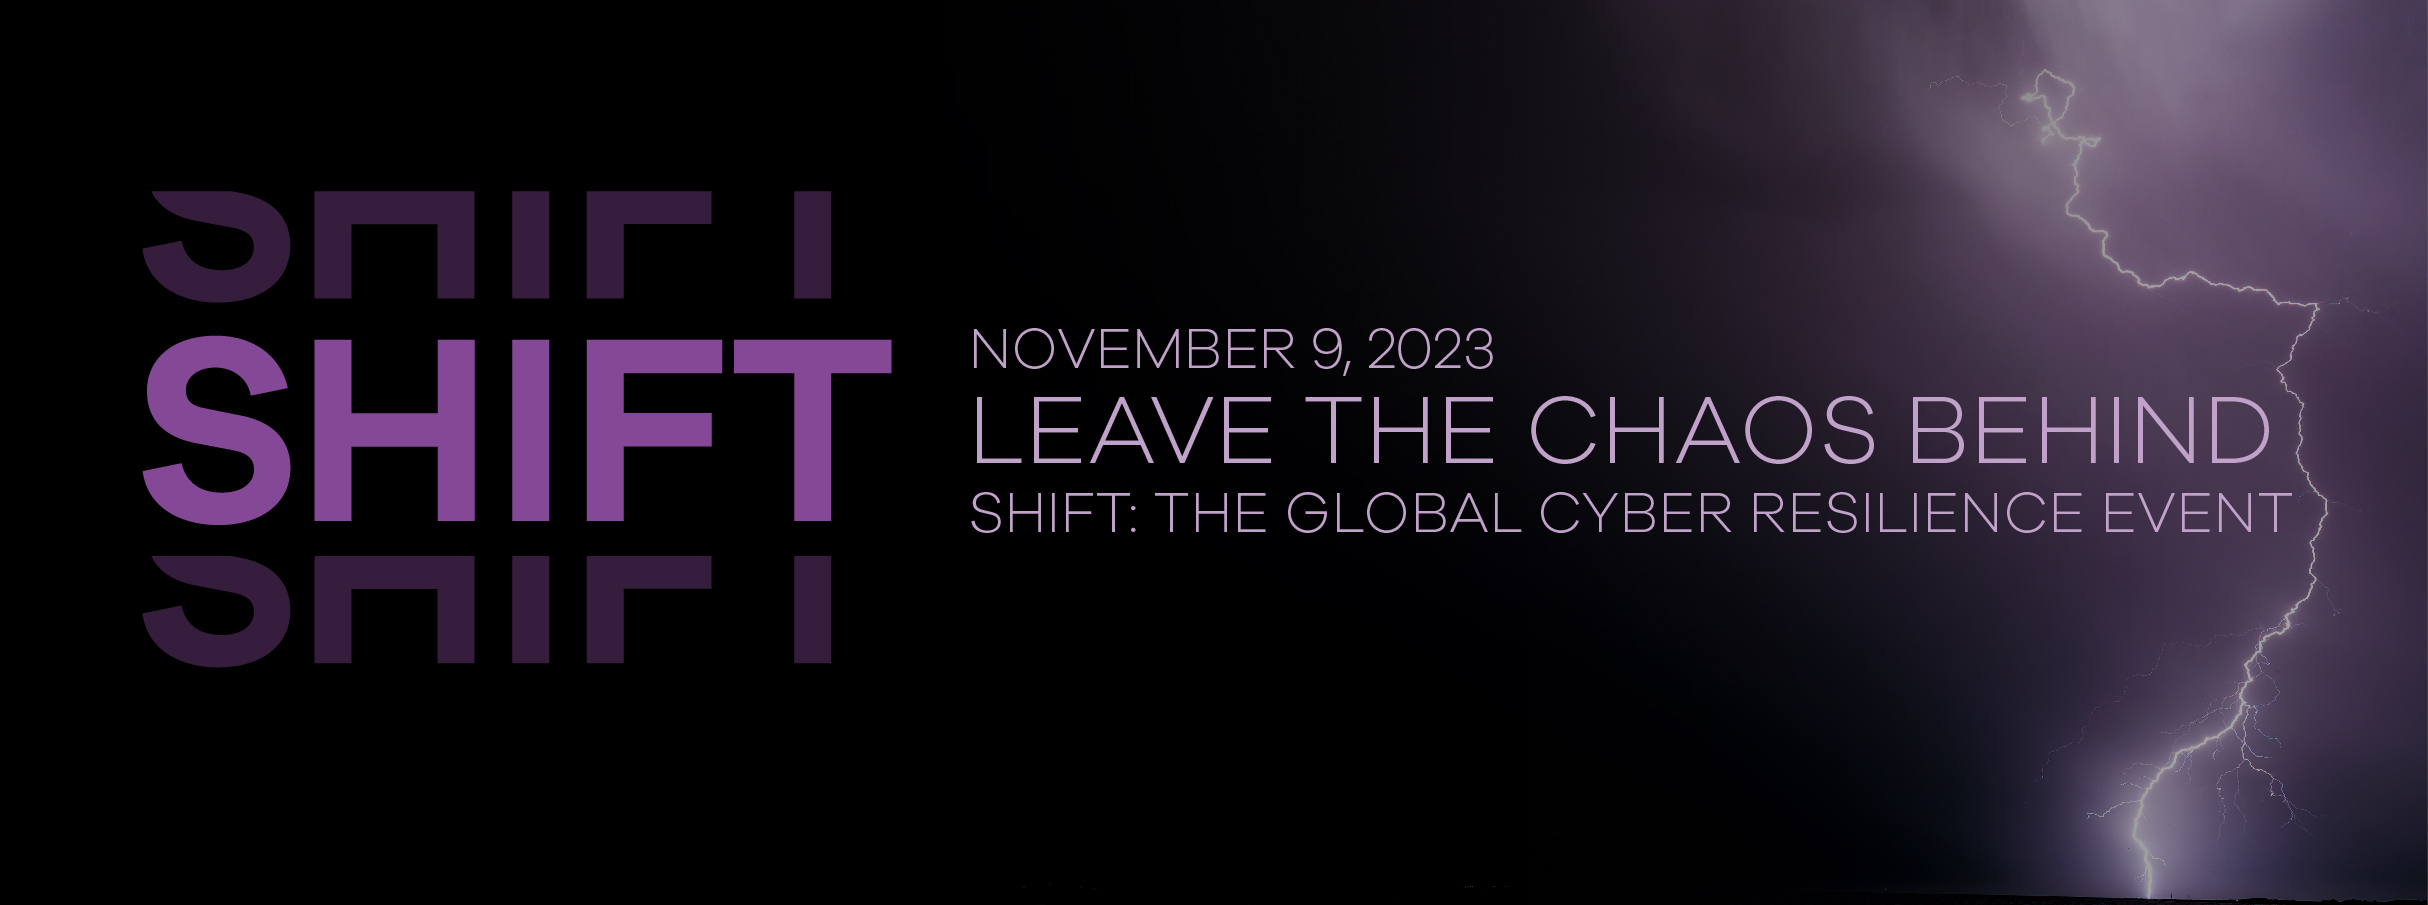 SHIFT-Leave the chaos behind